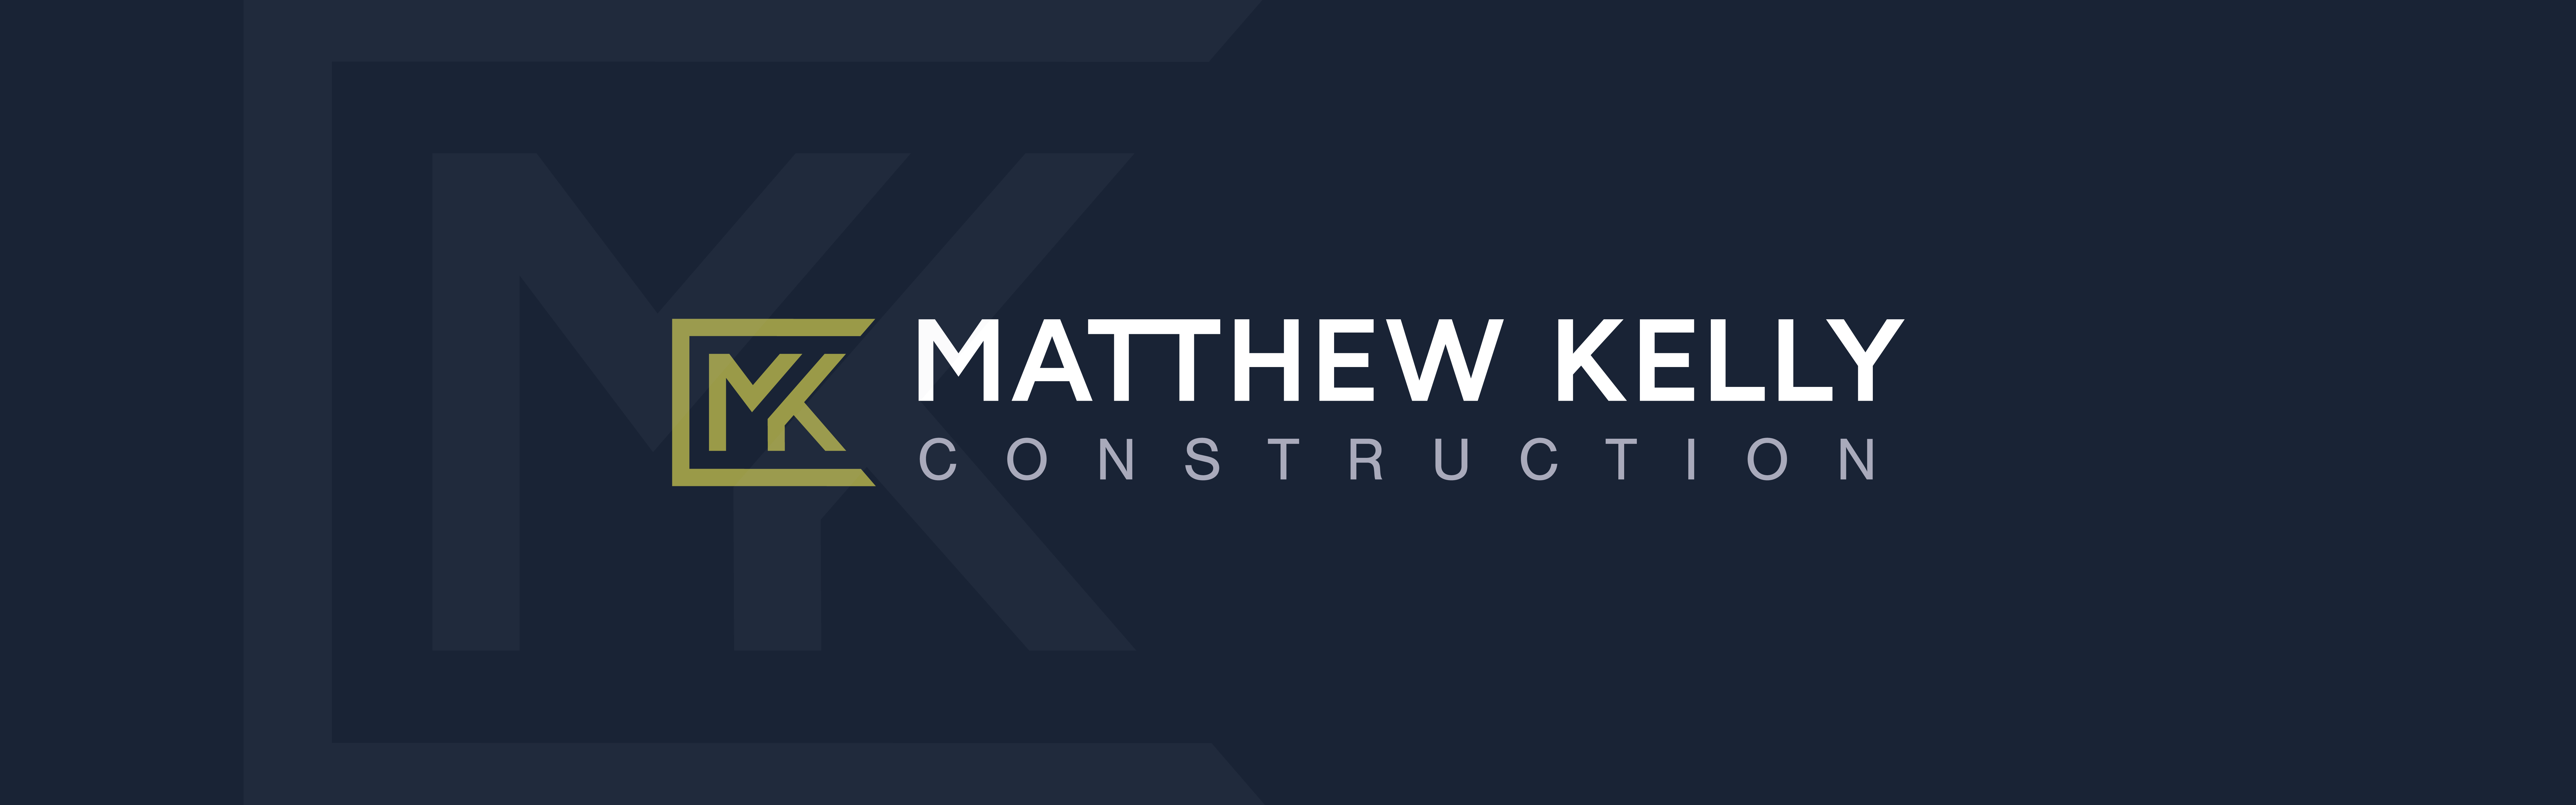 A graphic logo depicting the name "Matthew Kelly Construction" with the initials "mk" stylized in a square frame on a dark background.